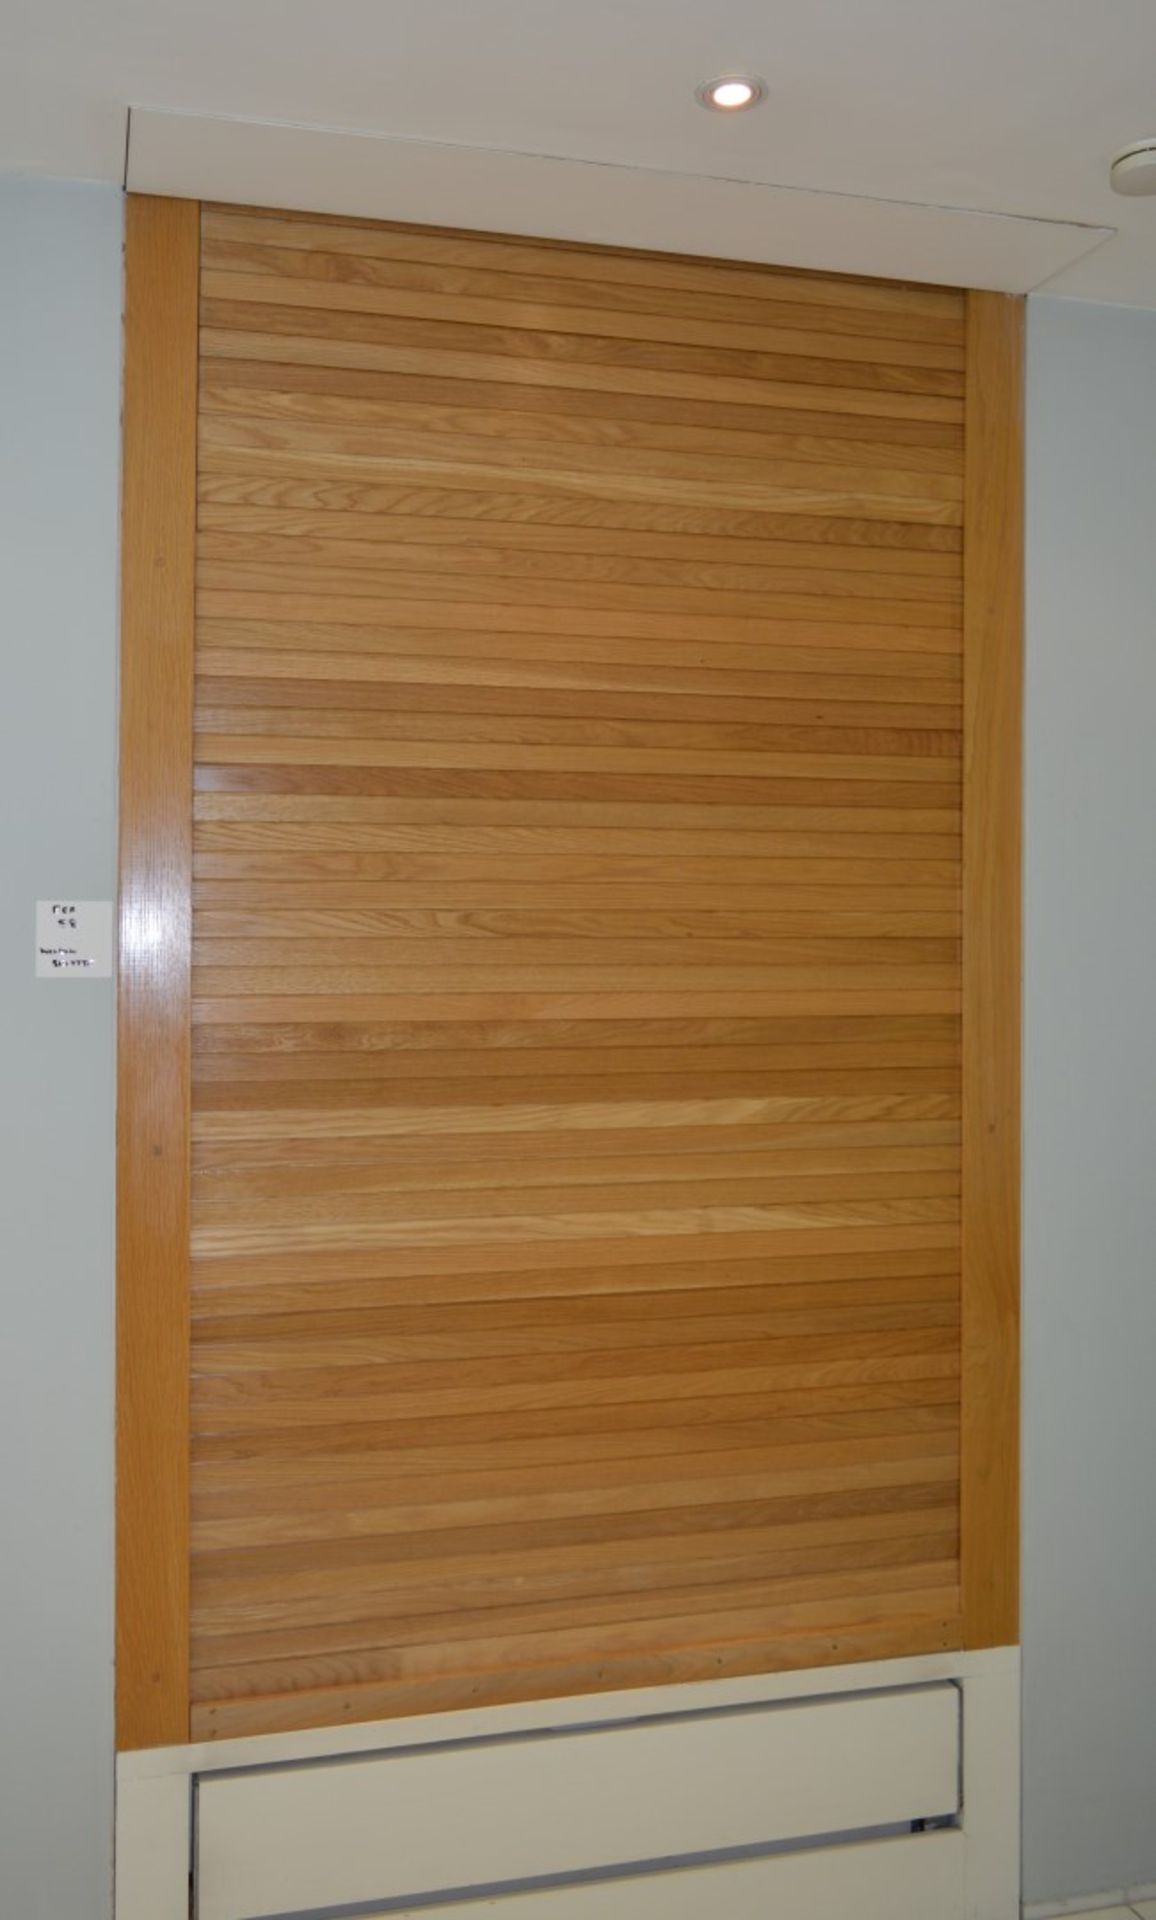 1 x Roller Shutter Window Shade With Electric Motor - Ref 58 - Solid Wooden Slat Design - CL230 - - Image 2 of 10